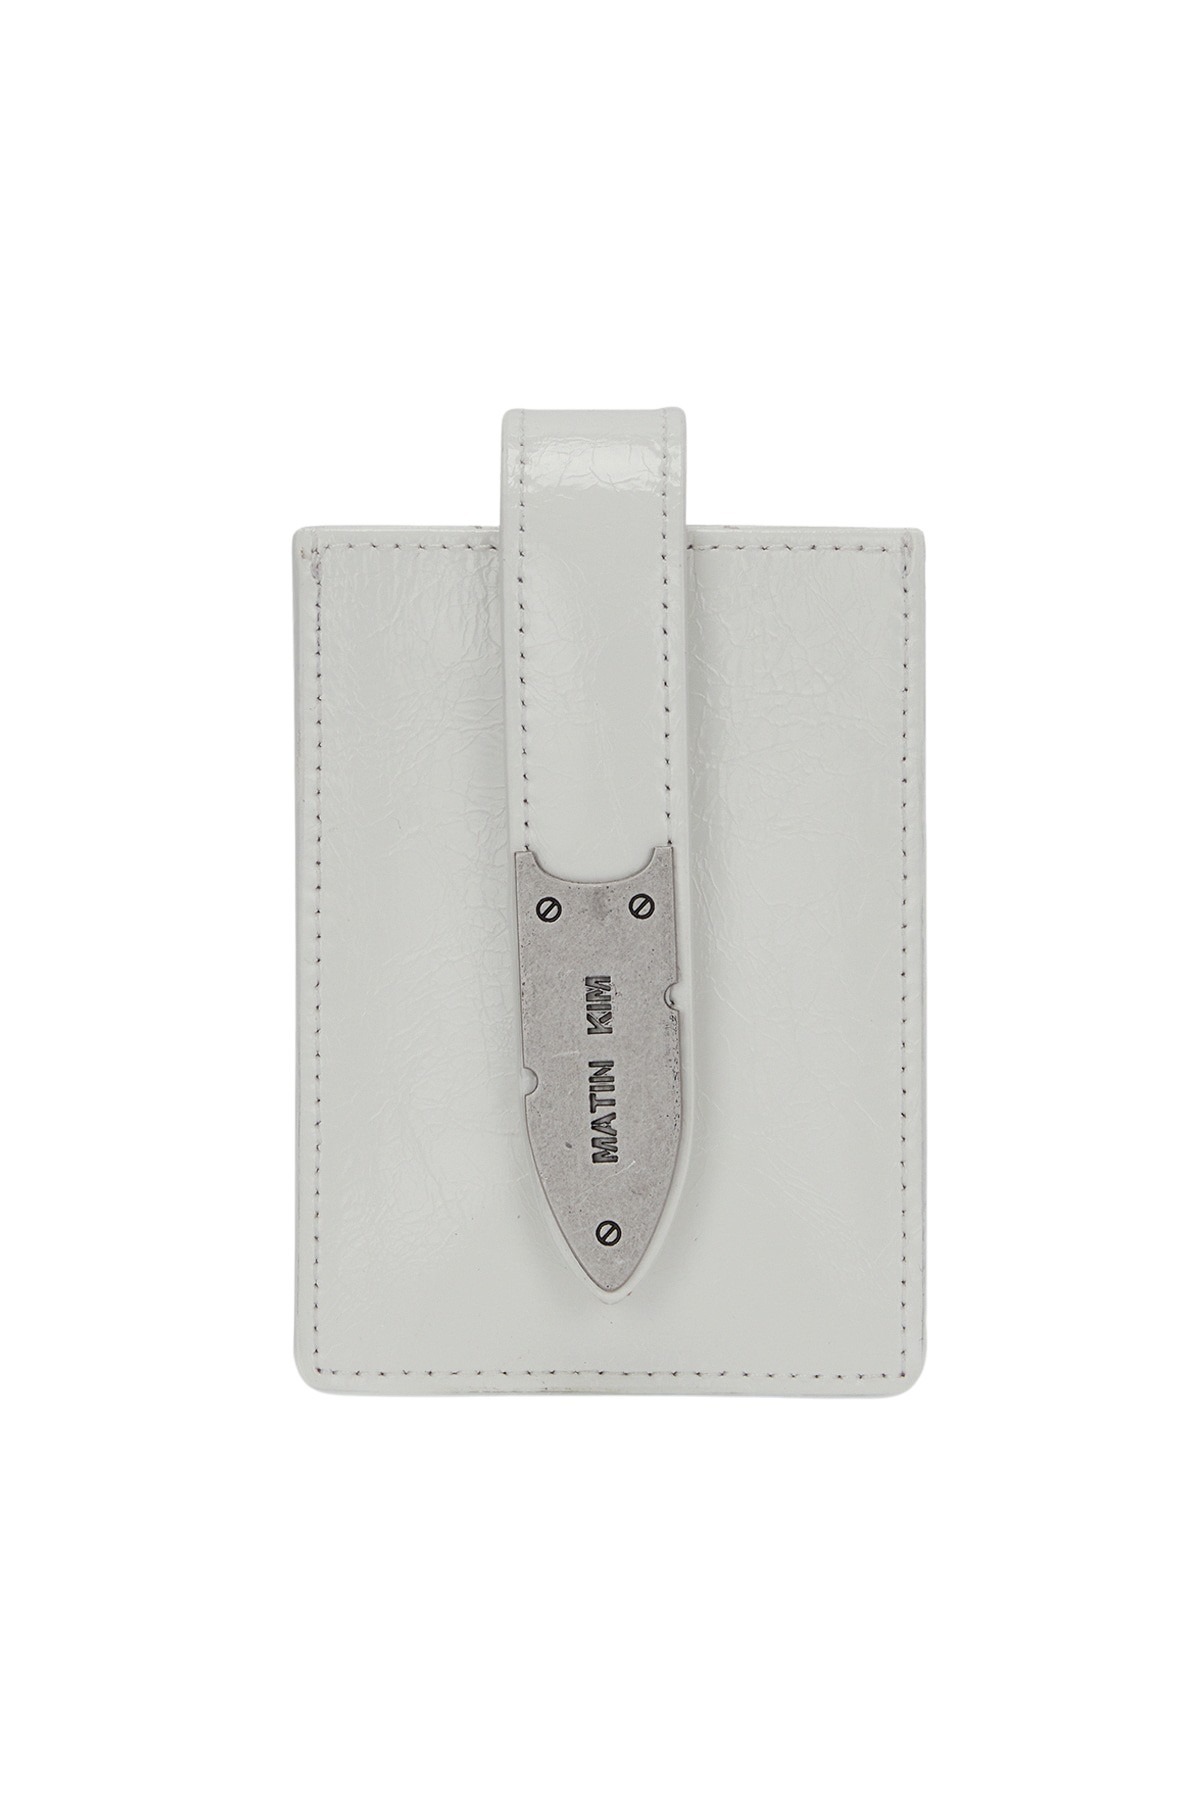 ACCORDION NECKLACE WALLET IN WHITE